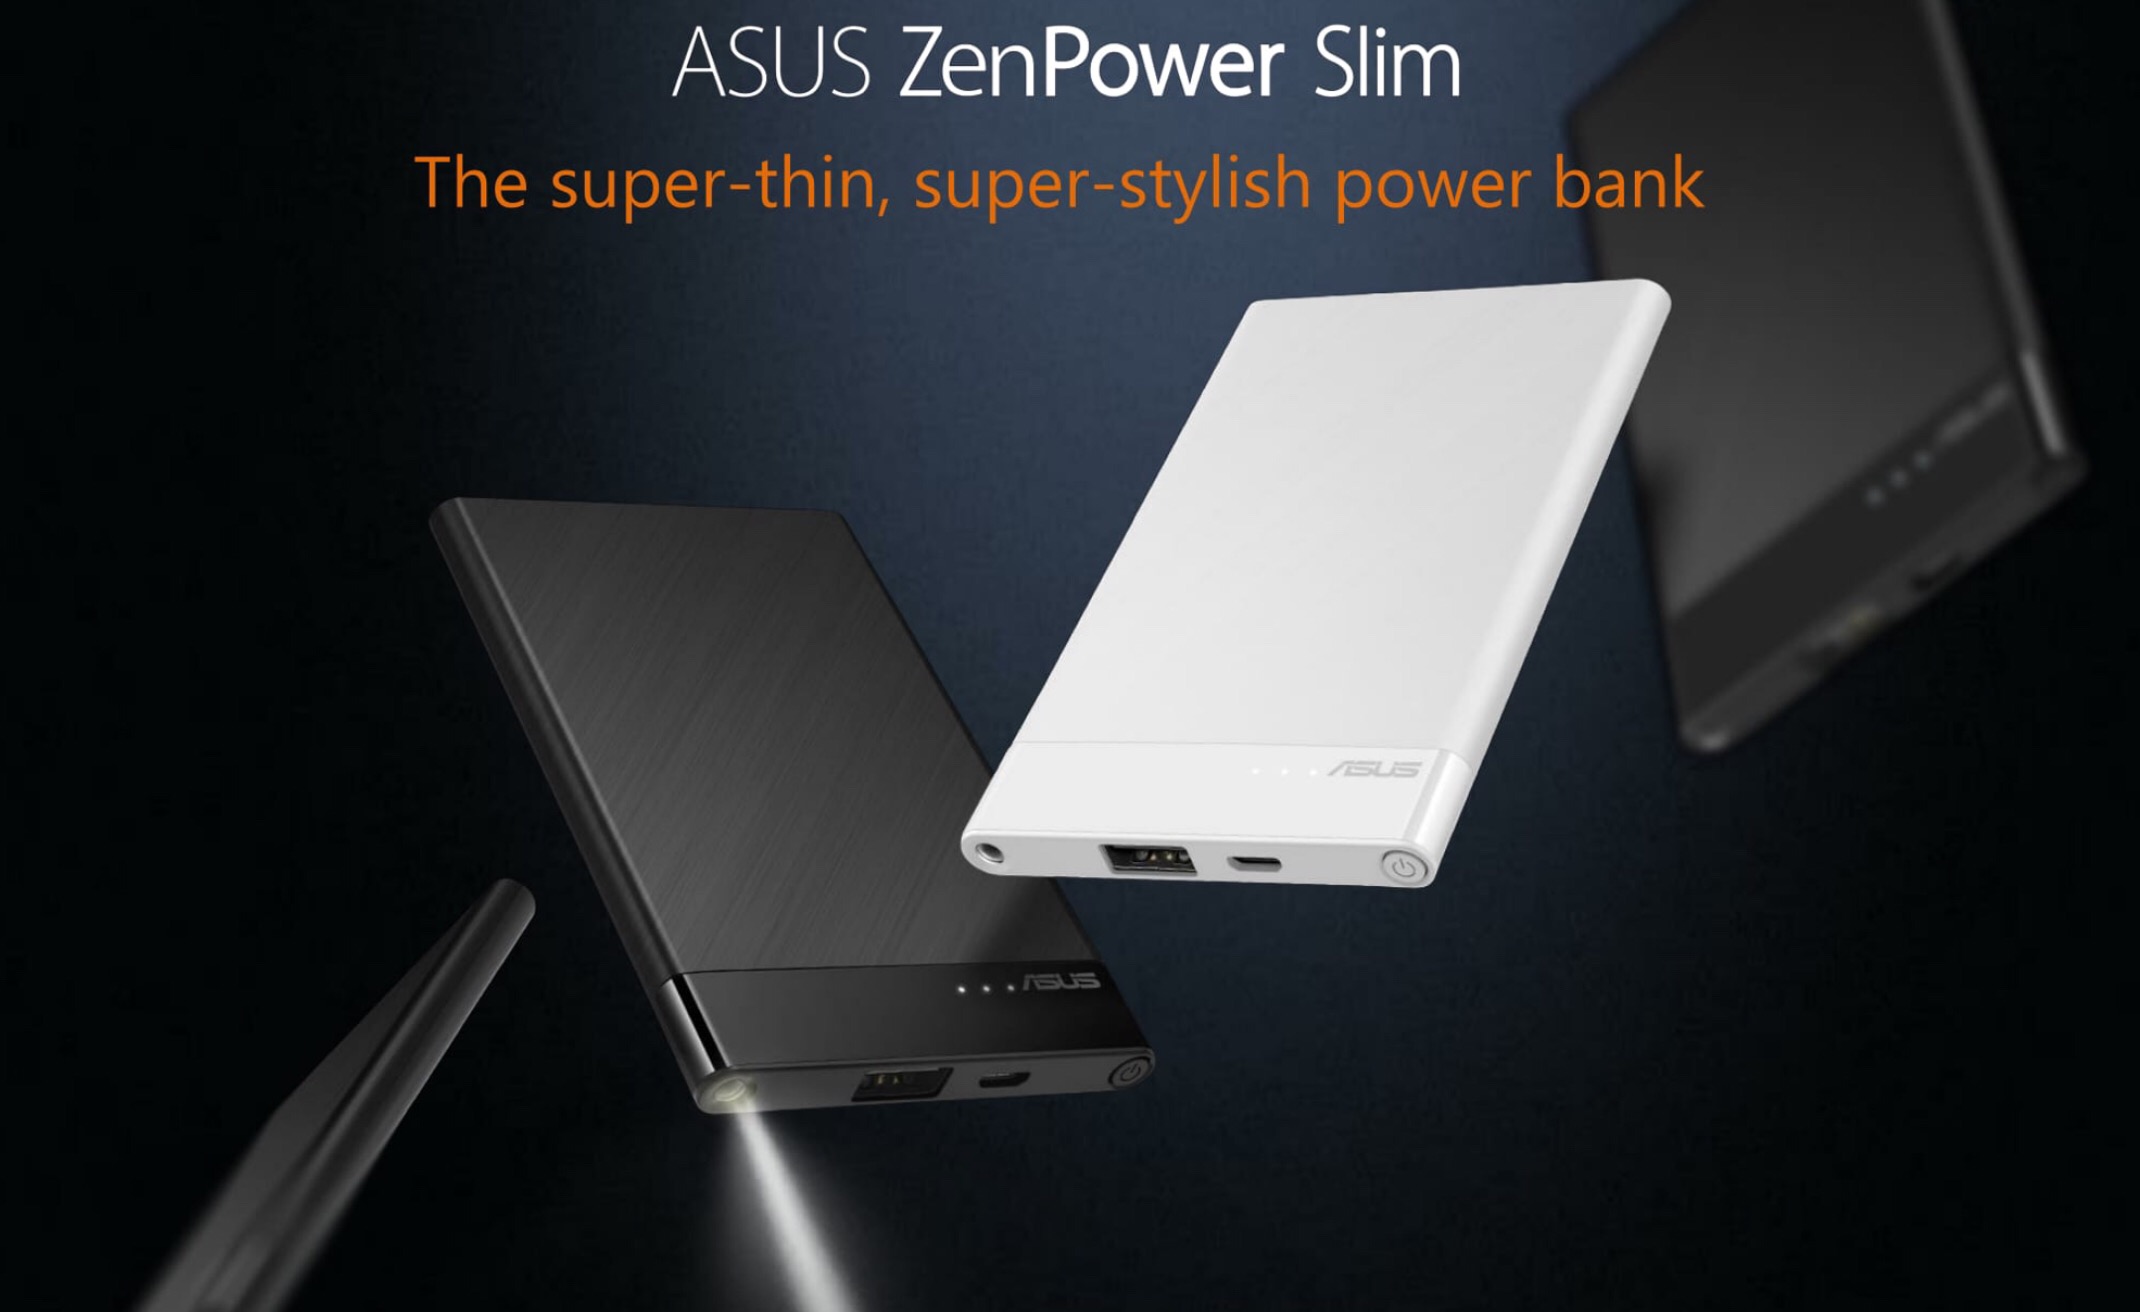 ASUS ZenPower Slim is now available at Lazada